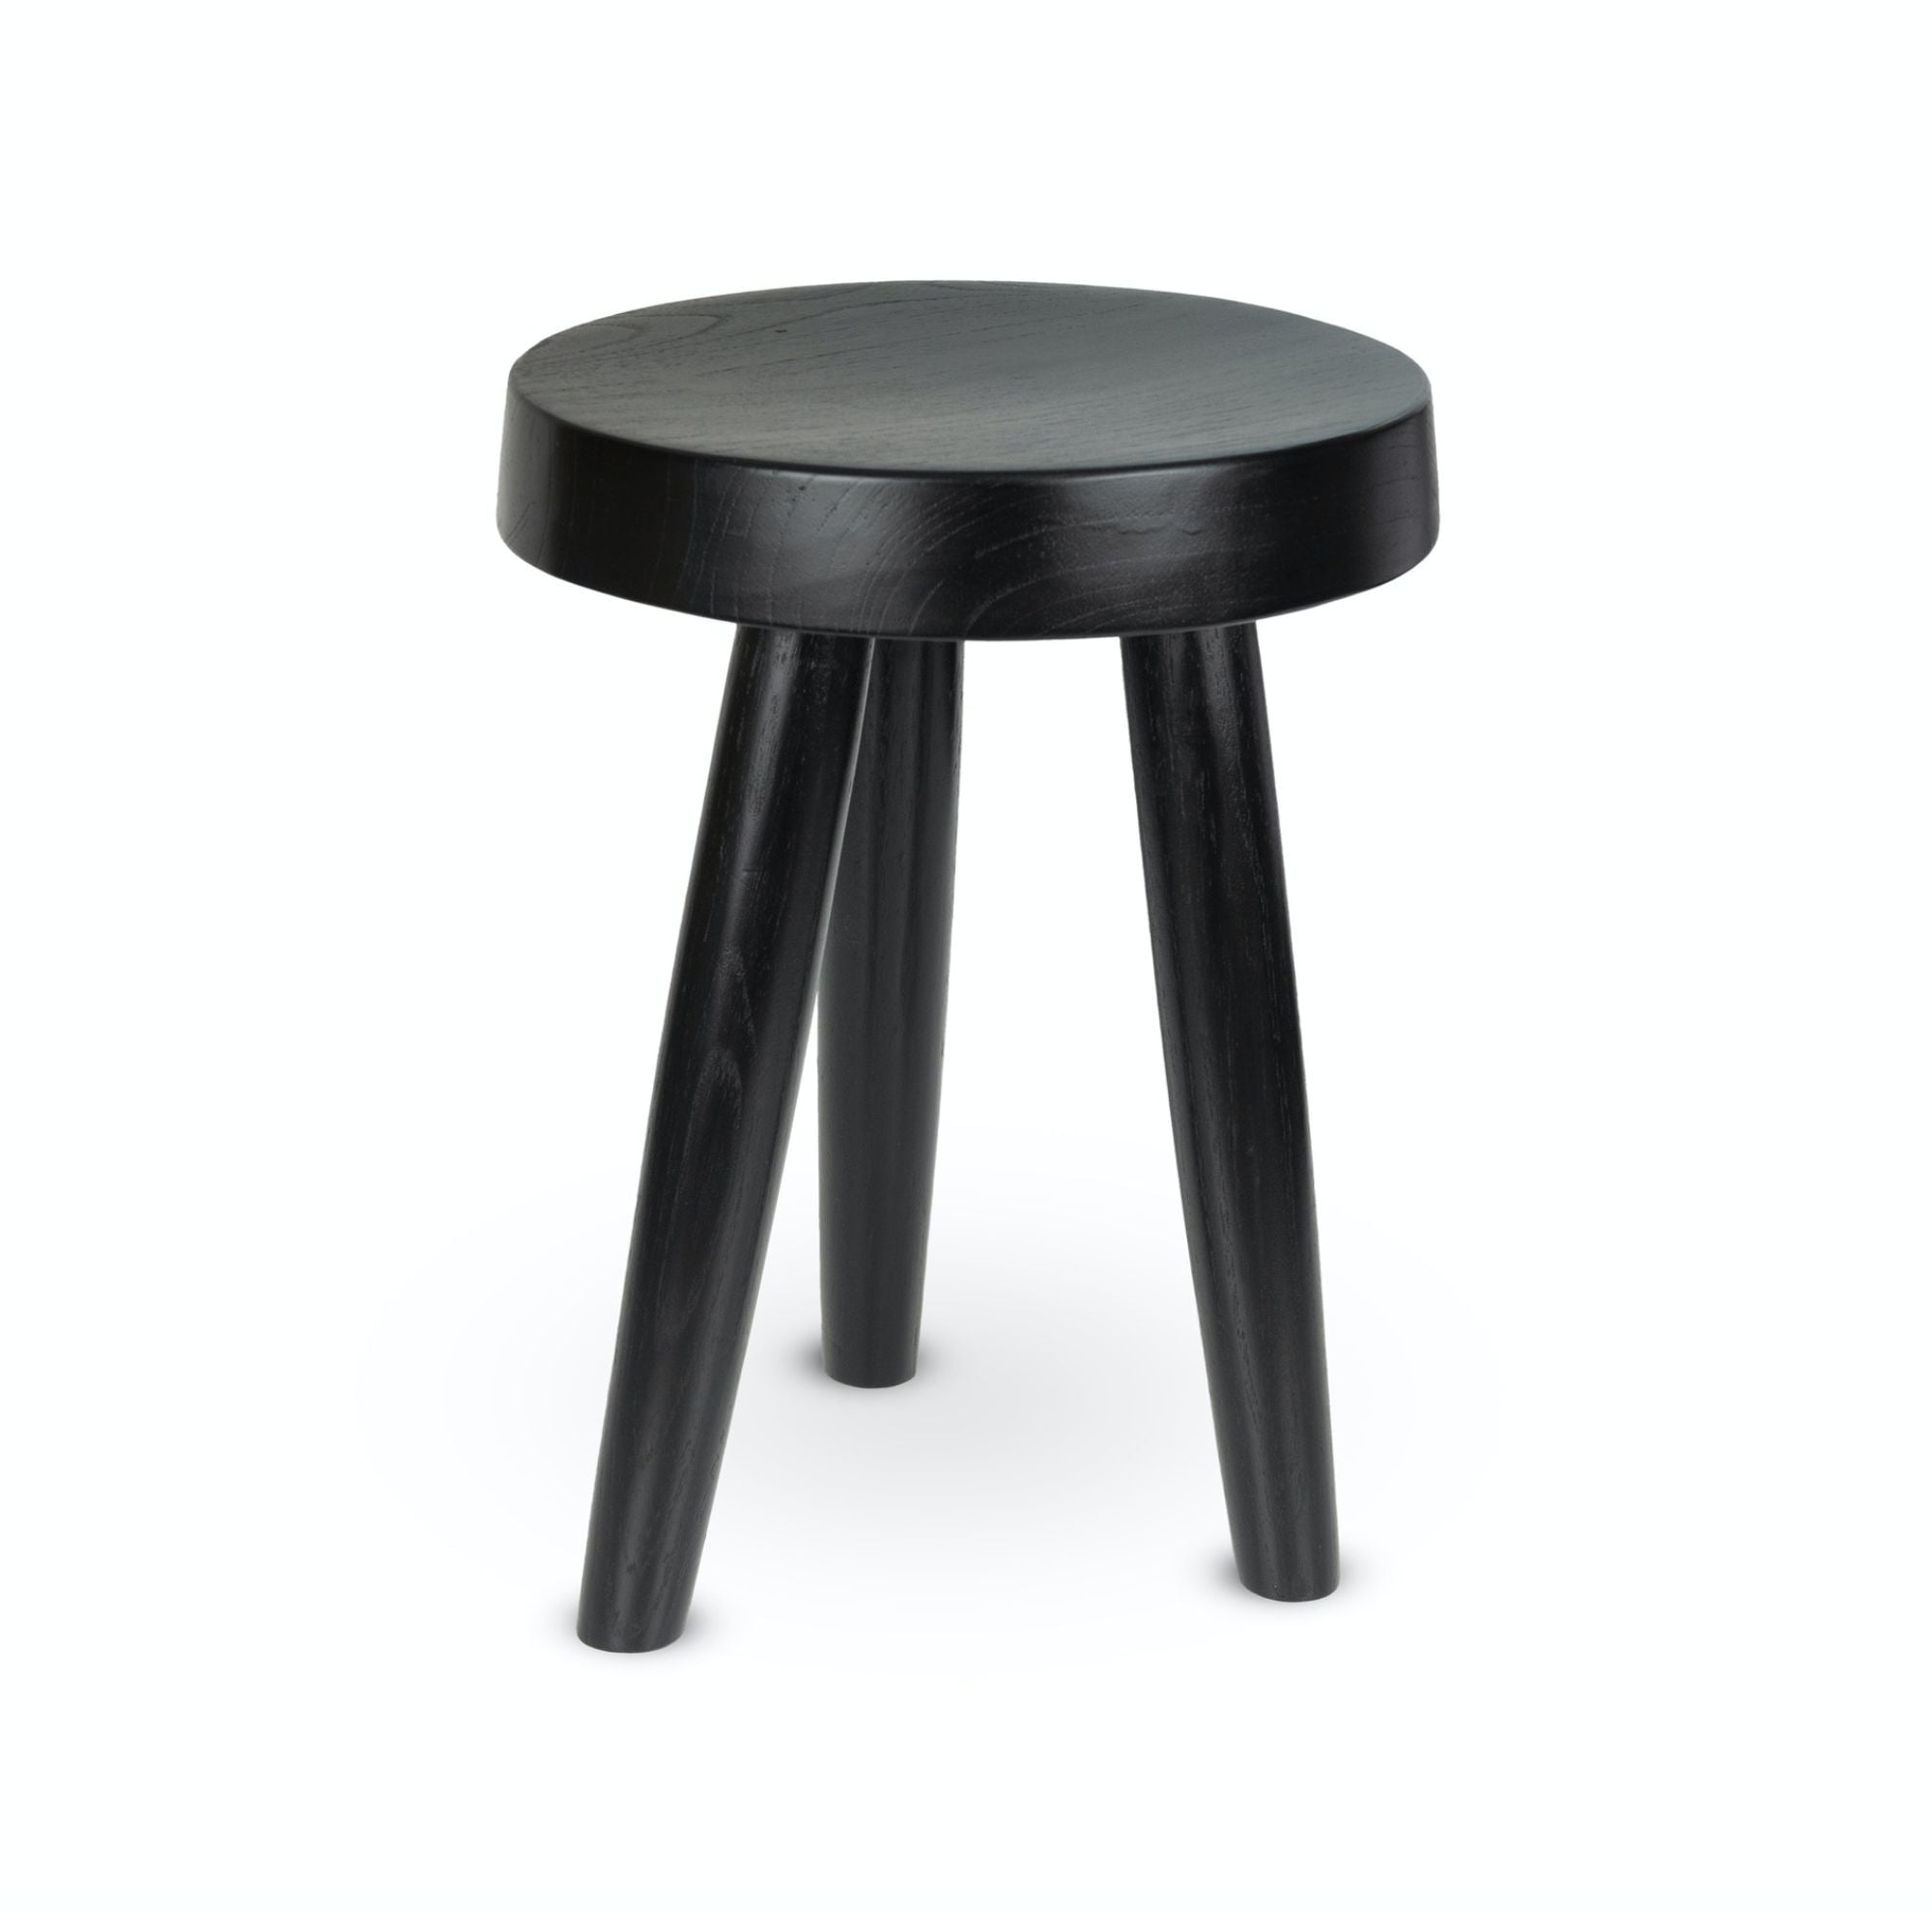 Charles Stool L - THAT COOL LIVING